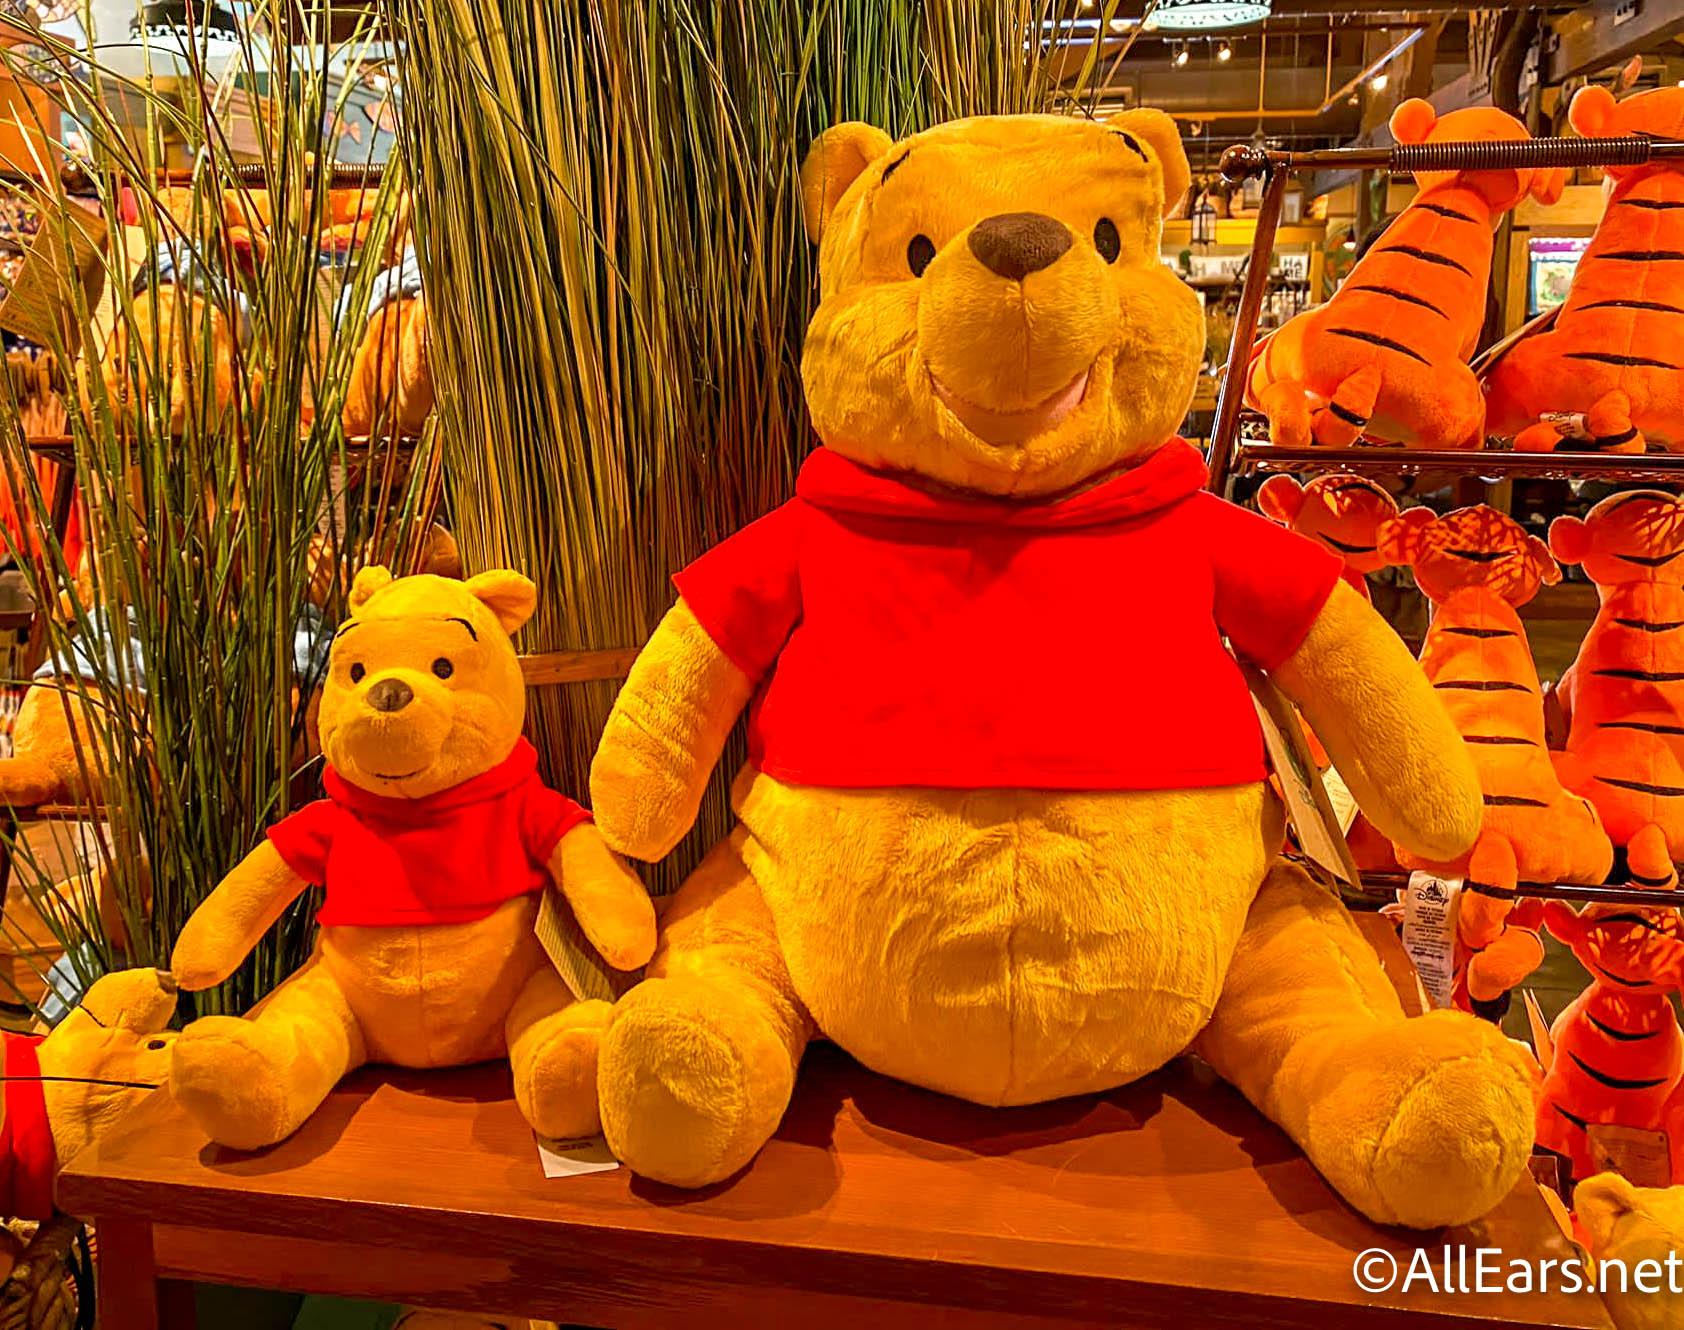 Find Out What's DIFFERENT About This Winnie the Pooh Collection in